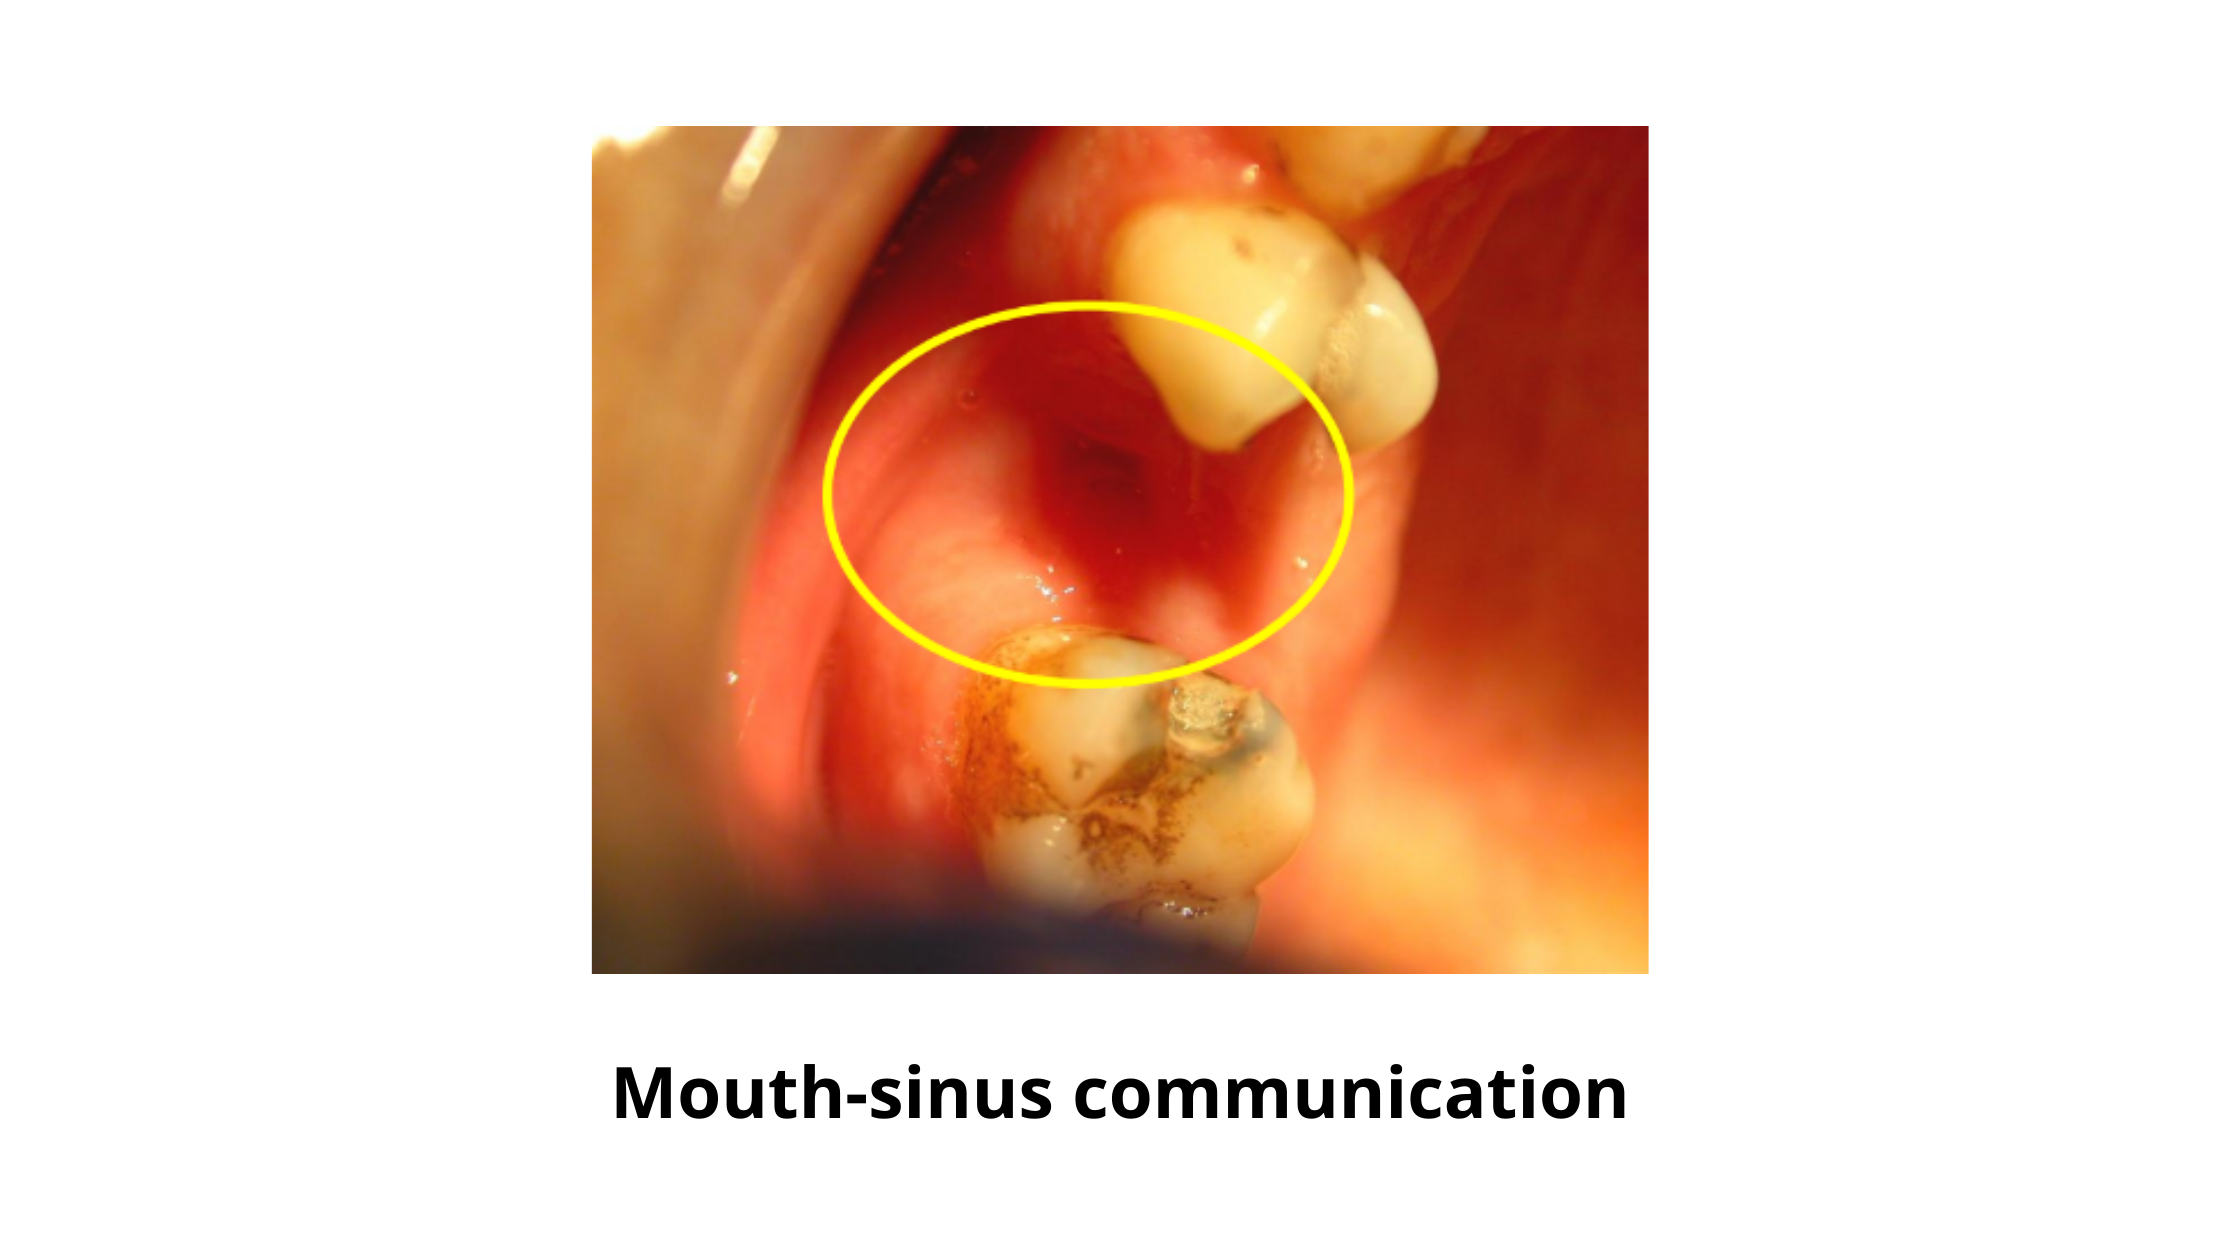 Sinus communication after tooth extraction